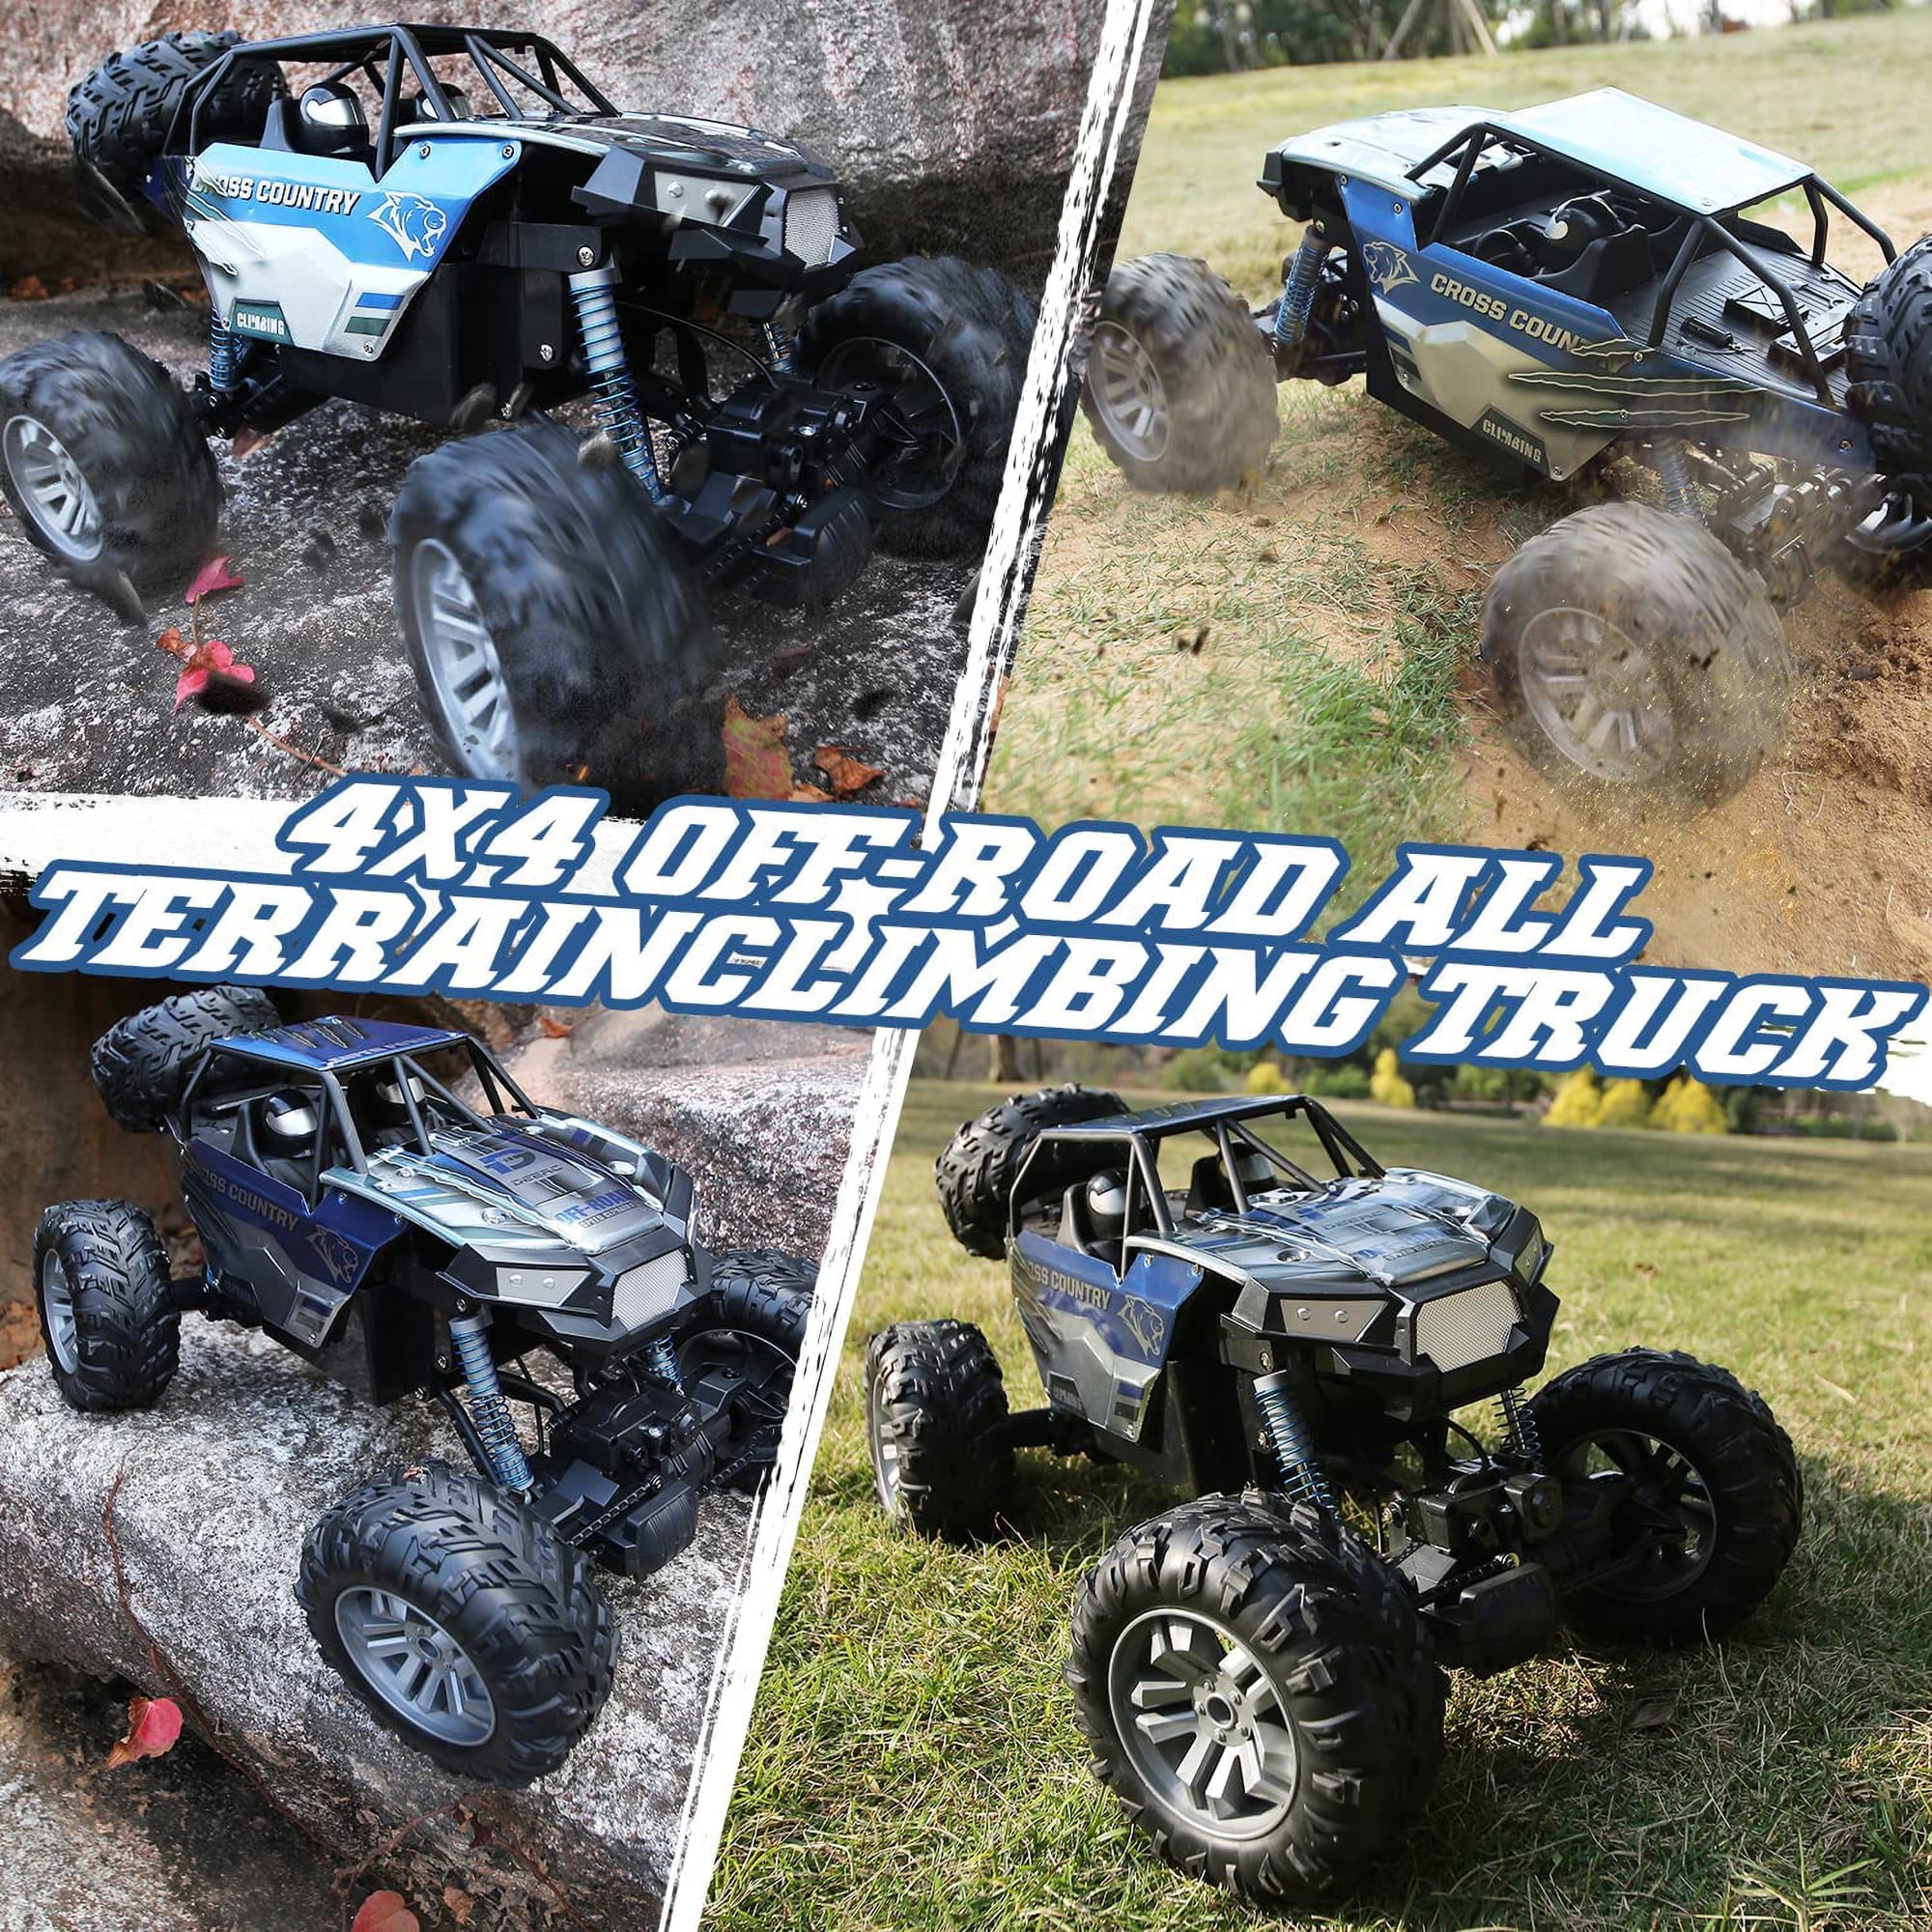 DEERC DE60 Metal Car 1:8 Scale 4WD Remote Control Monster Truck with 2 Batteries for Kids and Adults 2.4Ghz All Terrain Off-Road Vehicle